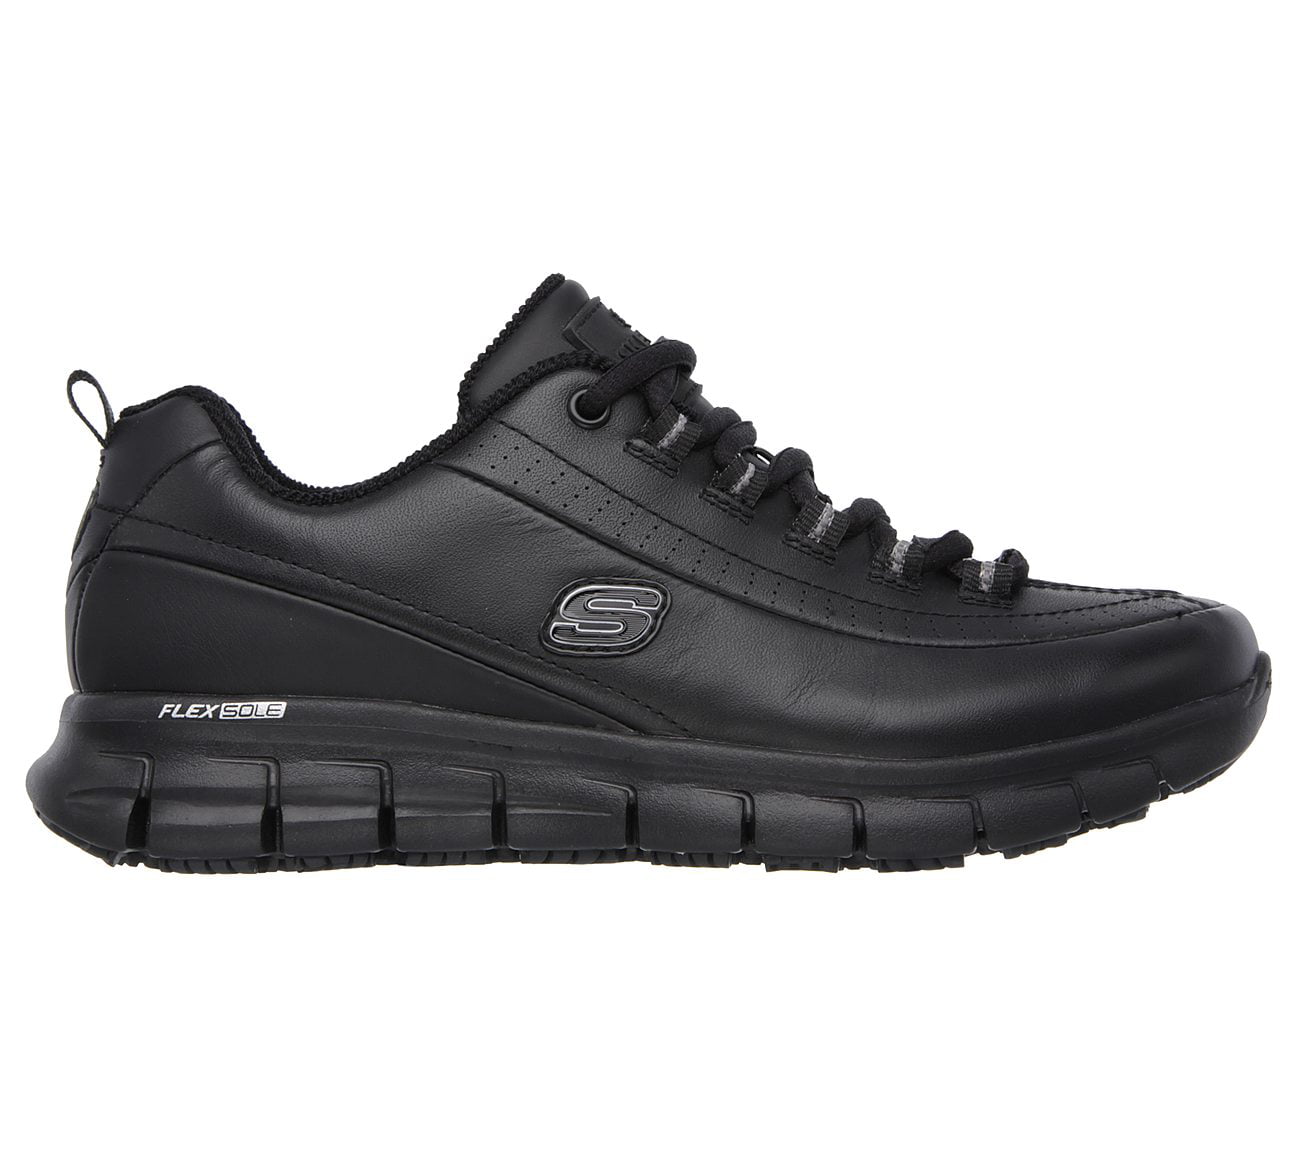 Skechers Work Women's Relaxed Fit Sure 